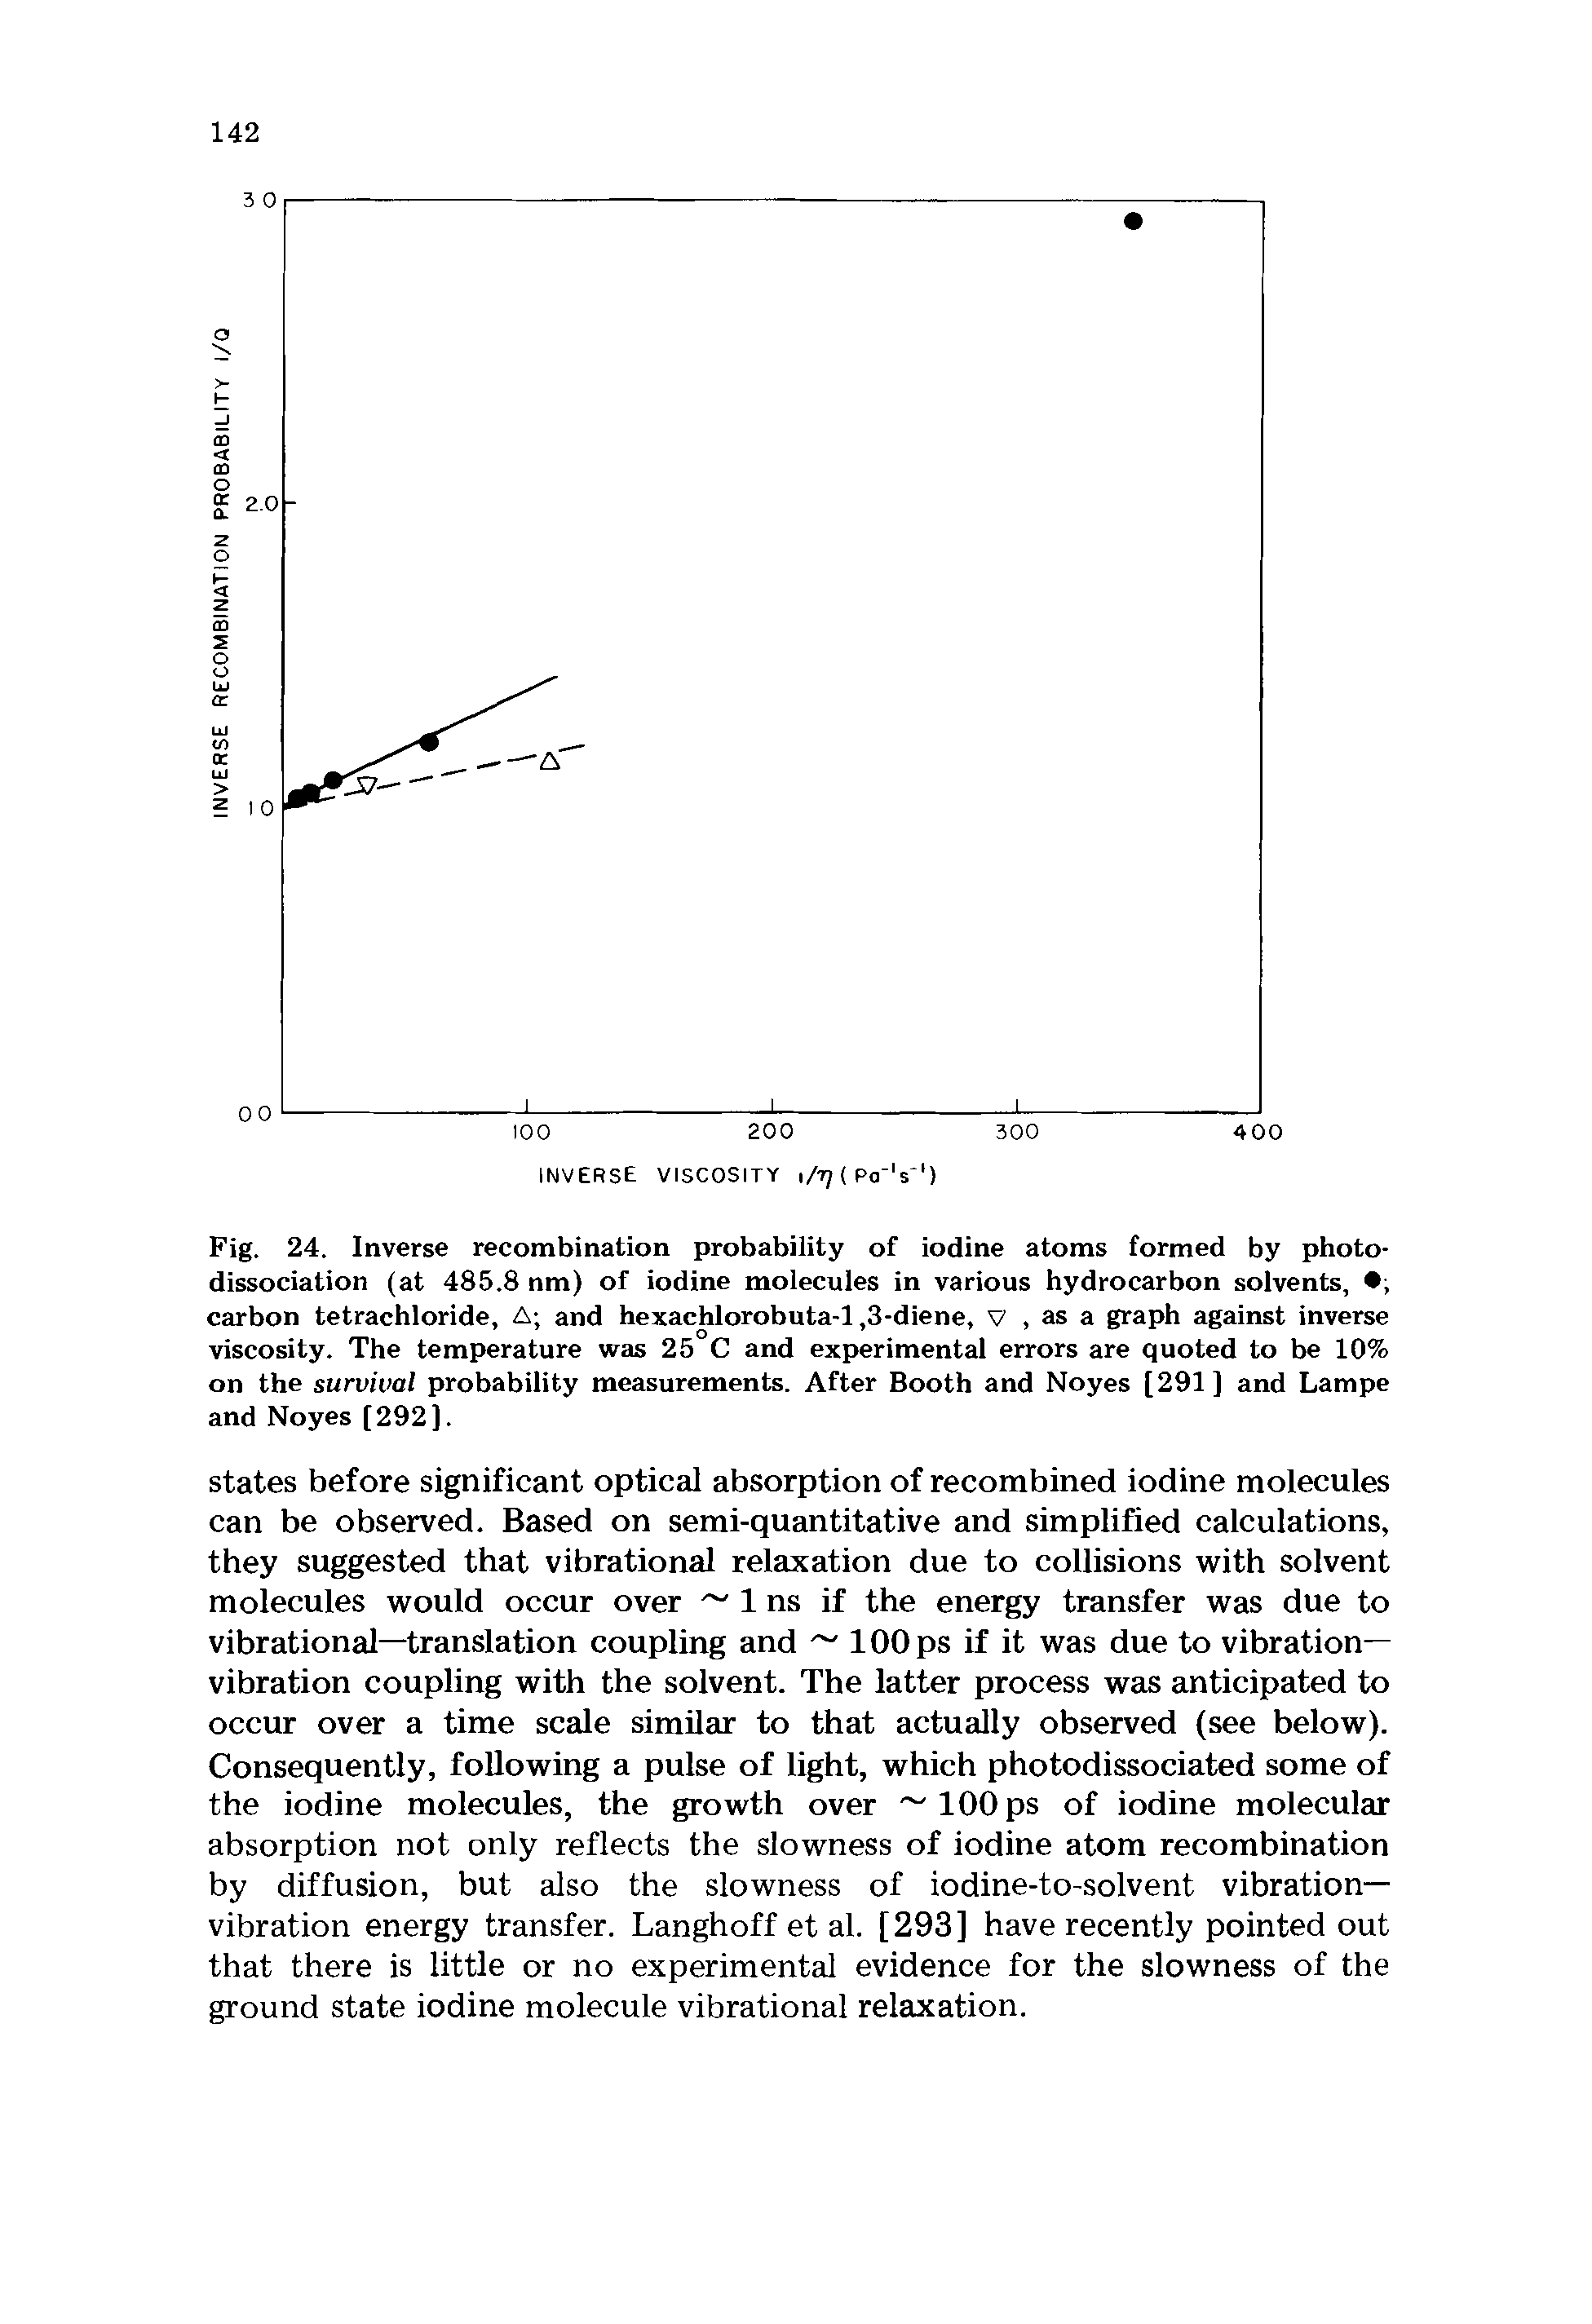 Fig. 24. Inverse recombination probability of iodine atoms formed by photodissociation (at 485.8 nm) of iodine molecules in various hydrocarbon solvents, , carbon tetrachloride, A and hexachlorobuta-1,3-diene, v, as a graph against inverse viscosity. The temperature was 25 C and experimental errors are quoted to be 10% on the survival probability measurements. After Booth and Noyes [291] and Lampe and Noyes [292],...